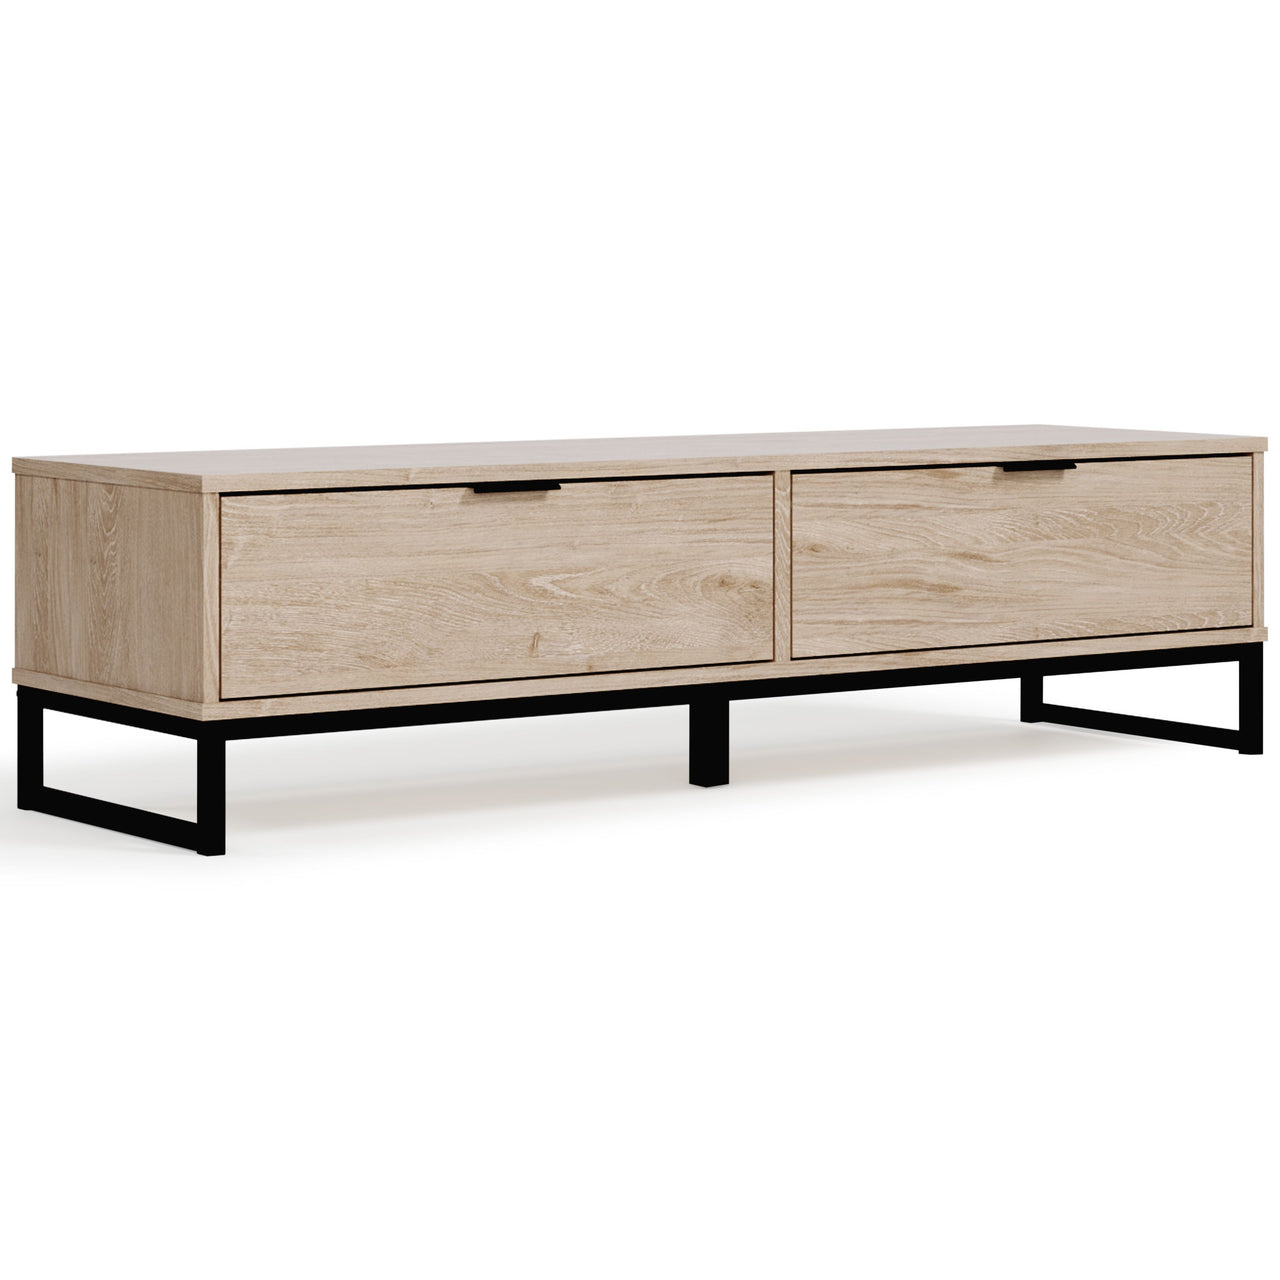 Oliah - Natural - Storage Bench Tony's Home Furnishings Furniture. Beds. Dressers. Sofas.